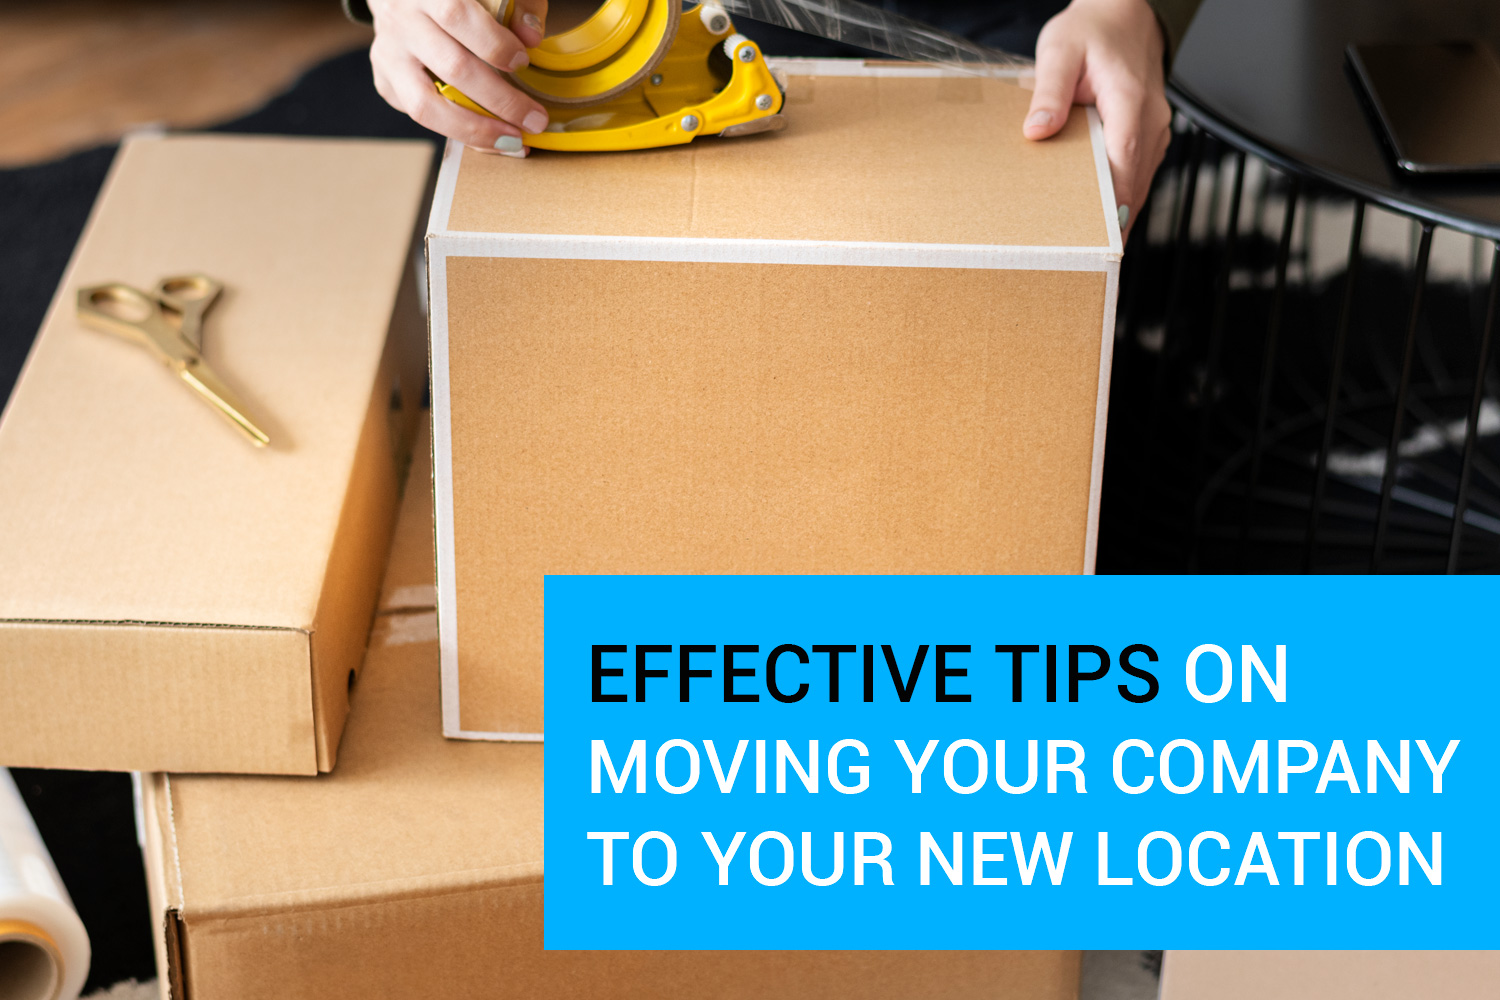 Moving Your Business – Effective Tips on Moving Your Company to Your New Location